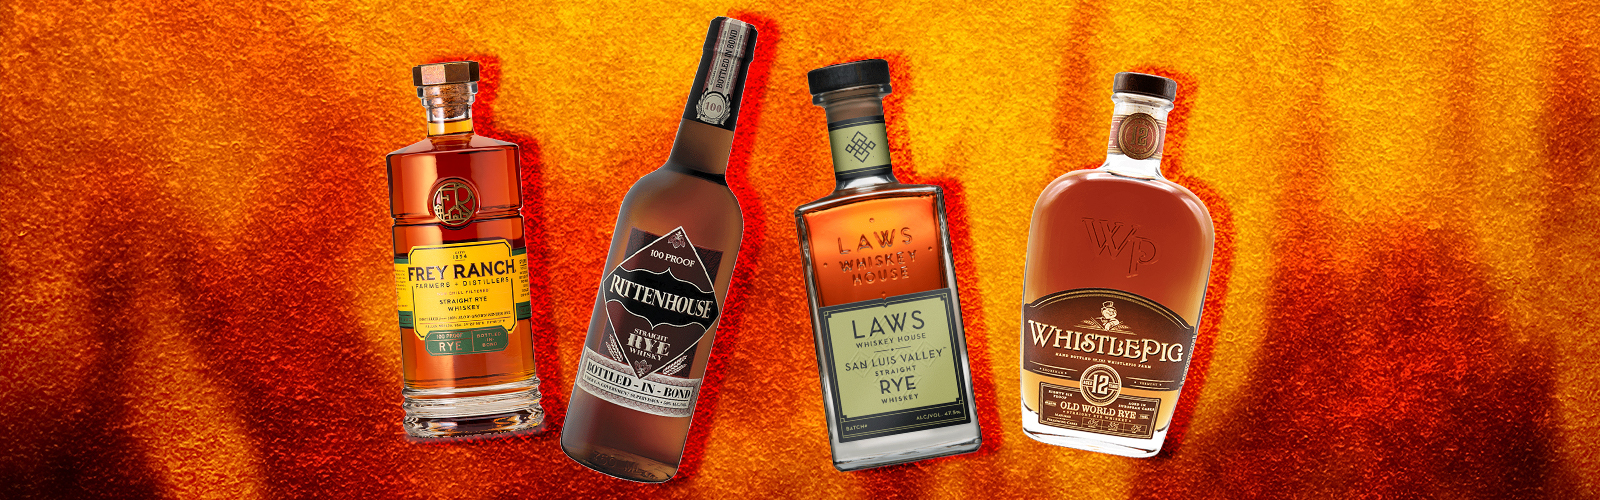 Frey Ranch/Rittenhouse/Laws/Whistlepig/istock/Uproxx